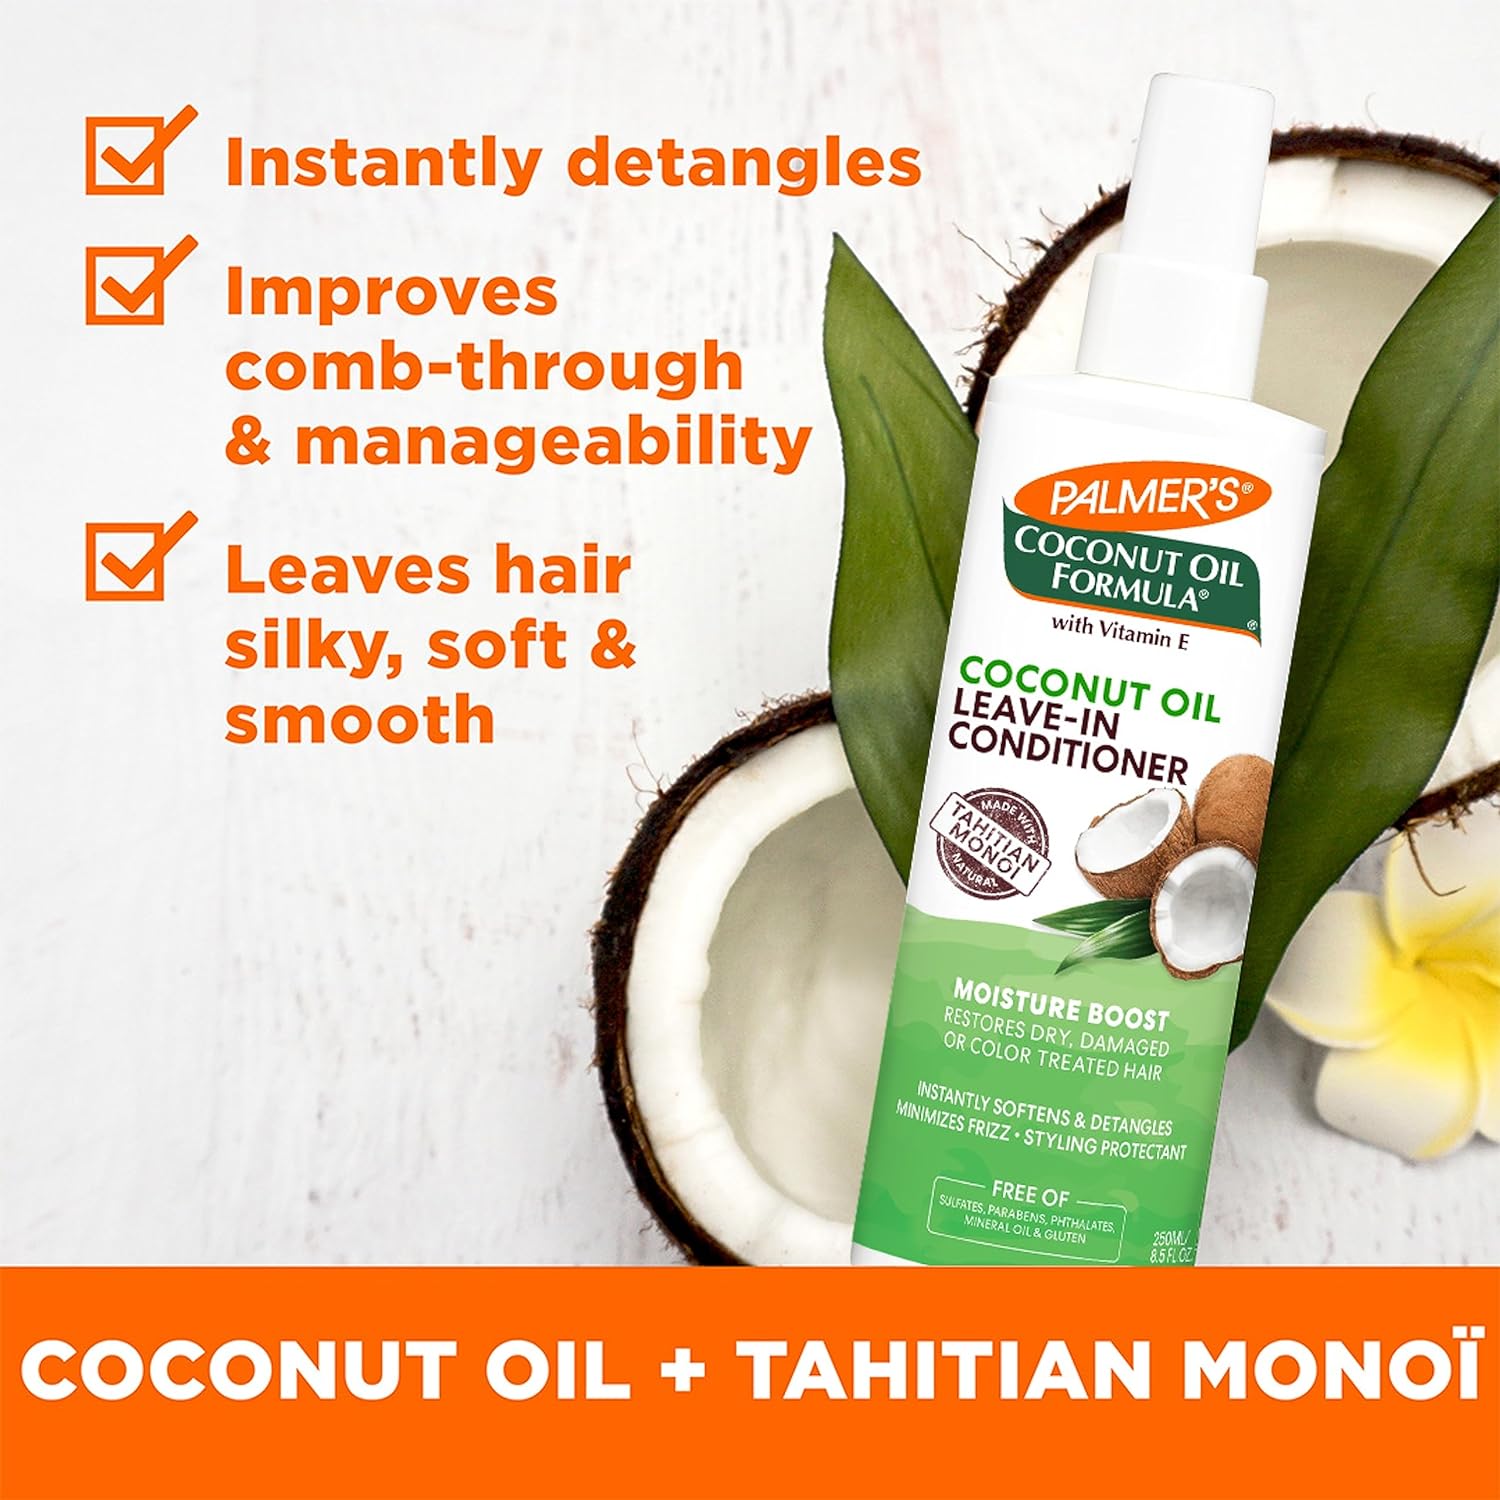 Palmer's Coconut Oil Formula Moisture Boost Leave-In Conditioner, 8.5 Ounce : Beauty & Personal Care